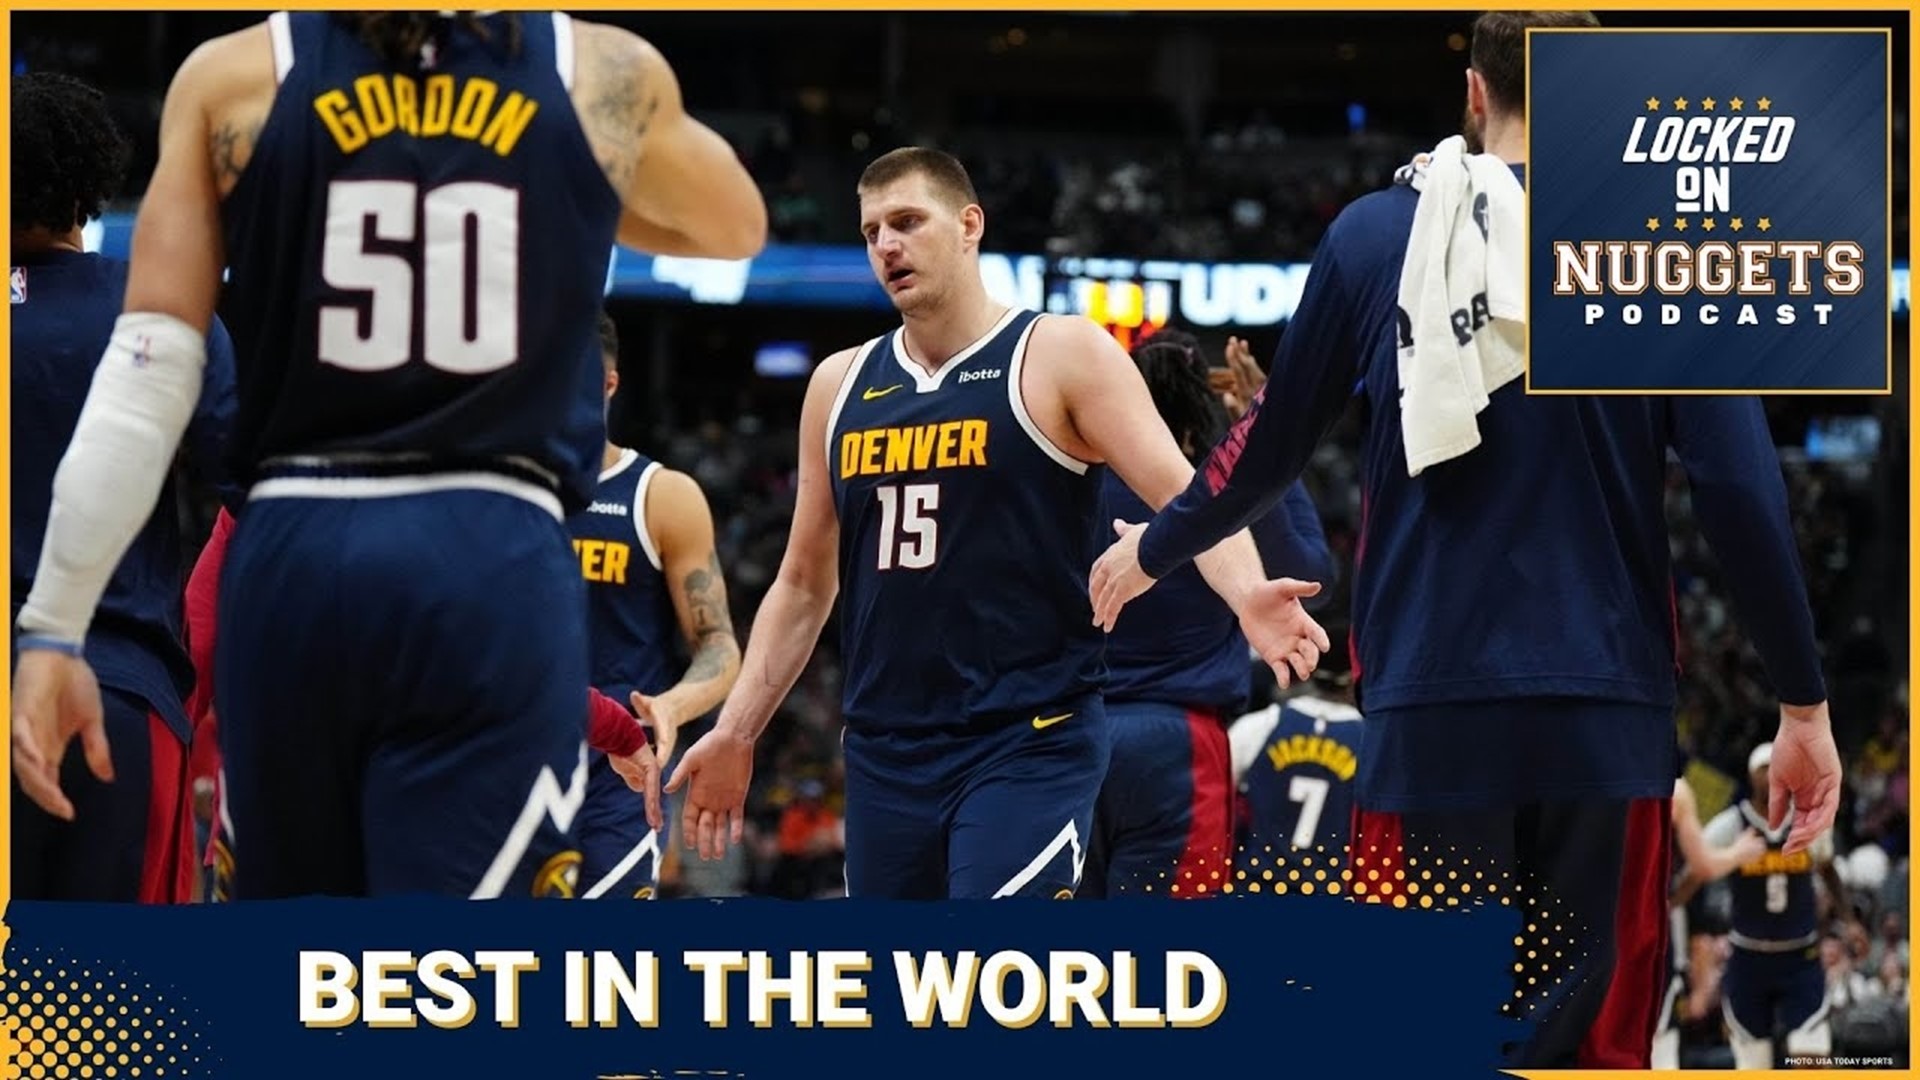 The Nuggets bounce back behind a phenomenal game from Nikola Jokic. World's Finest breaks it down as Matt Moore describes why stats never do Nikola Jokic justice.